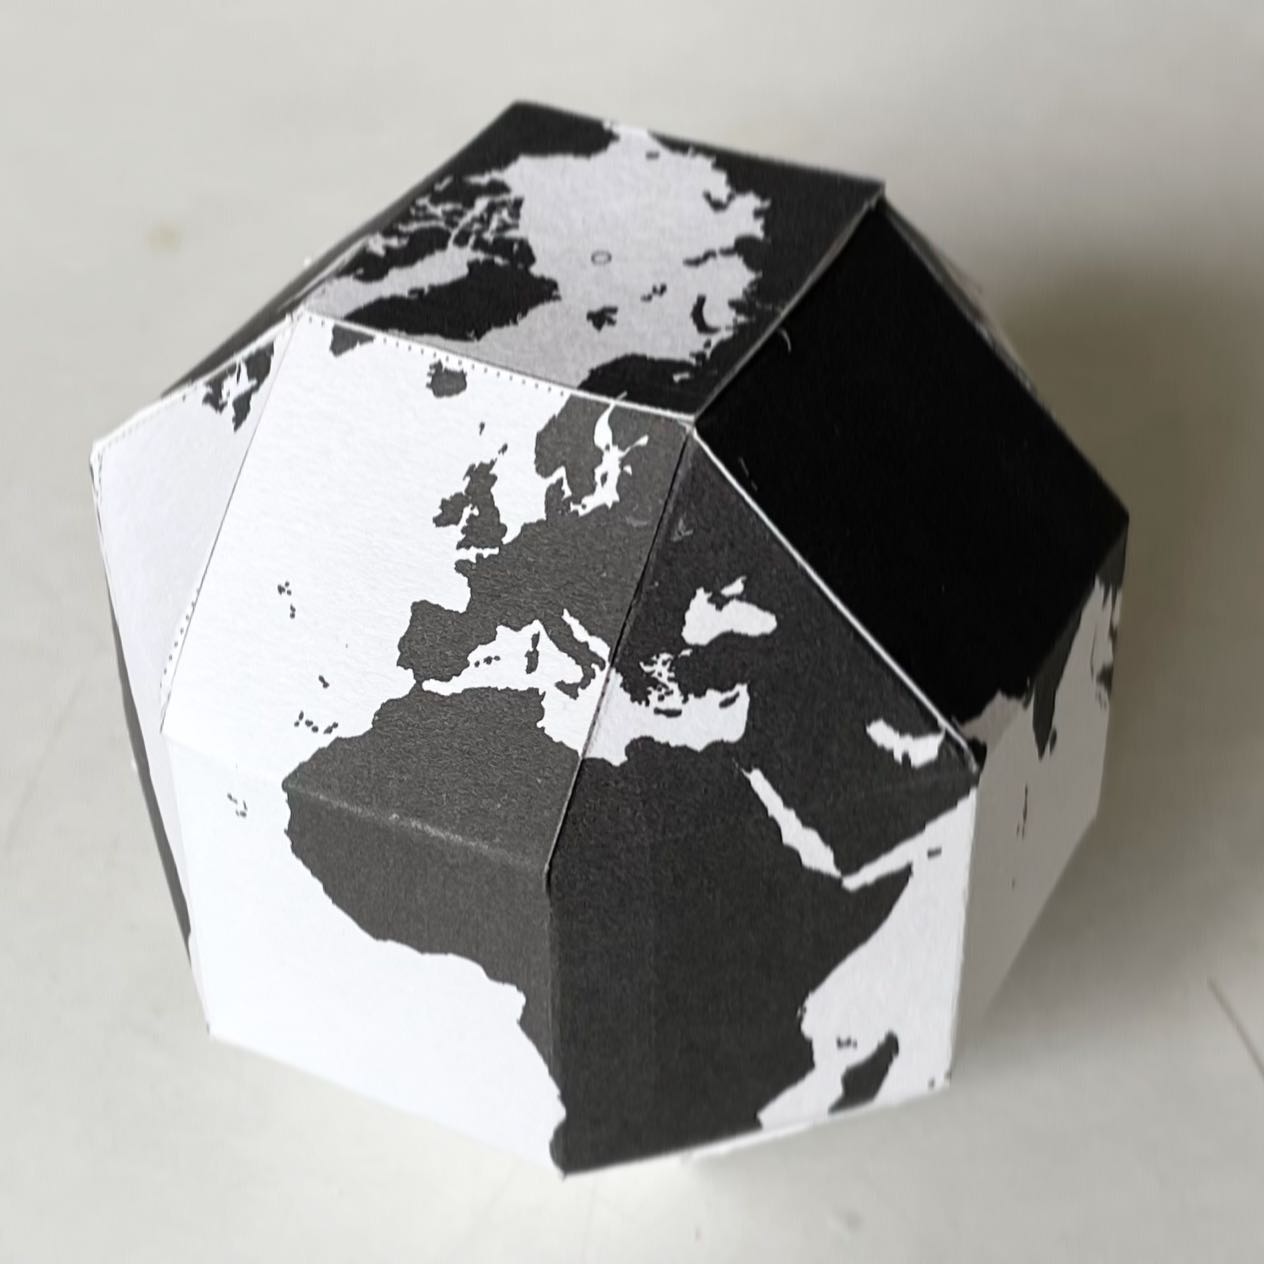 Add this #Rhombicuboctahedron to your collection of geometric 🌍 #download the #printable #globe  #template and make it now. The world is a small place… ♥️ 🇺🇦

⚠️ Link to product seems to be broken… if you can’t click on it go to @makepopupcards website (on profile) and click on “recent” tab.